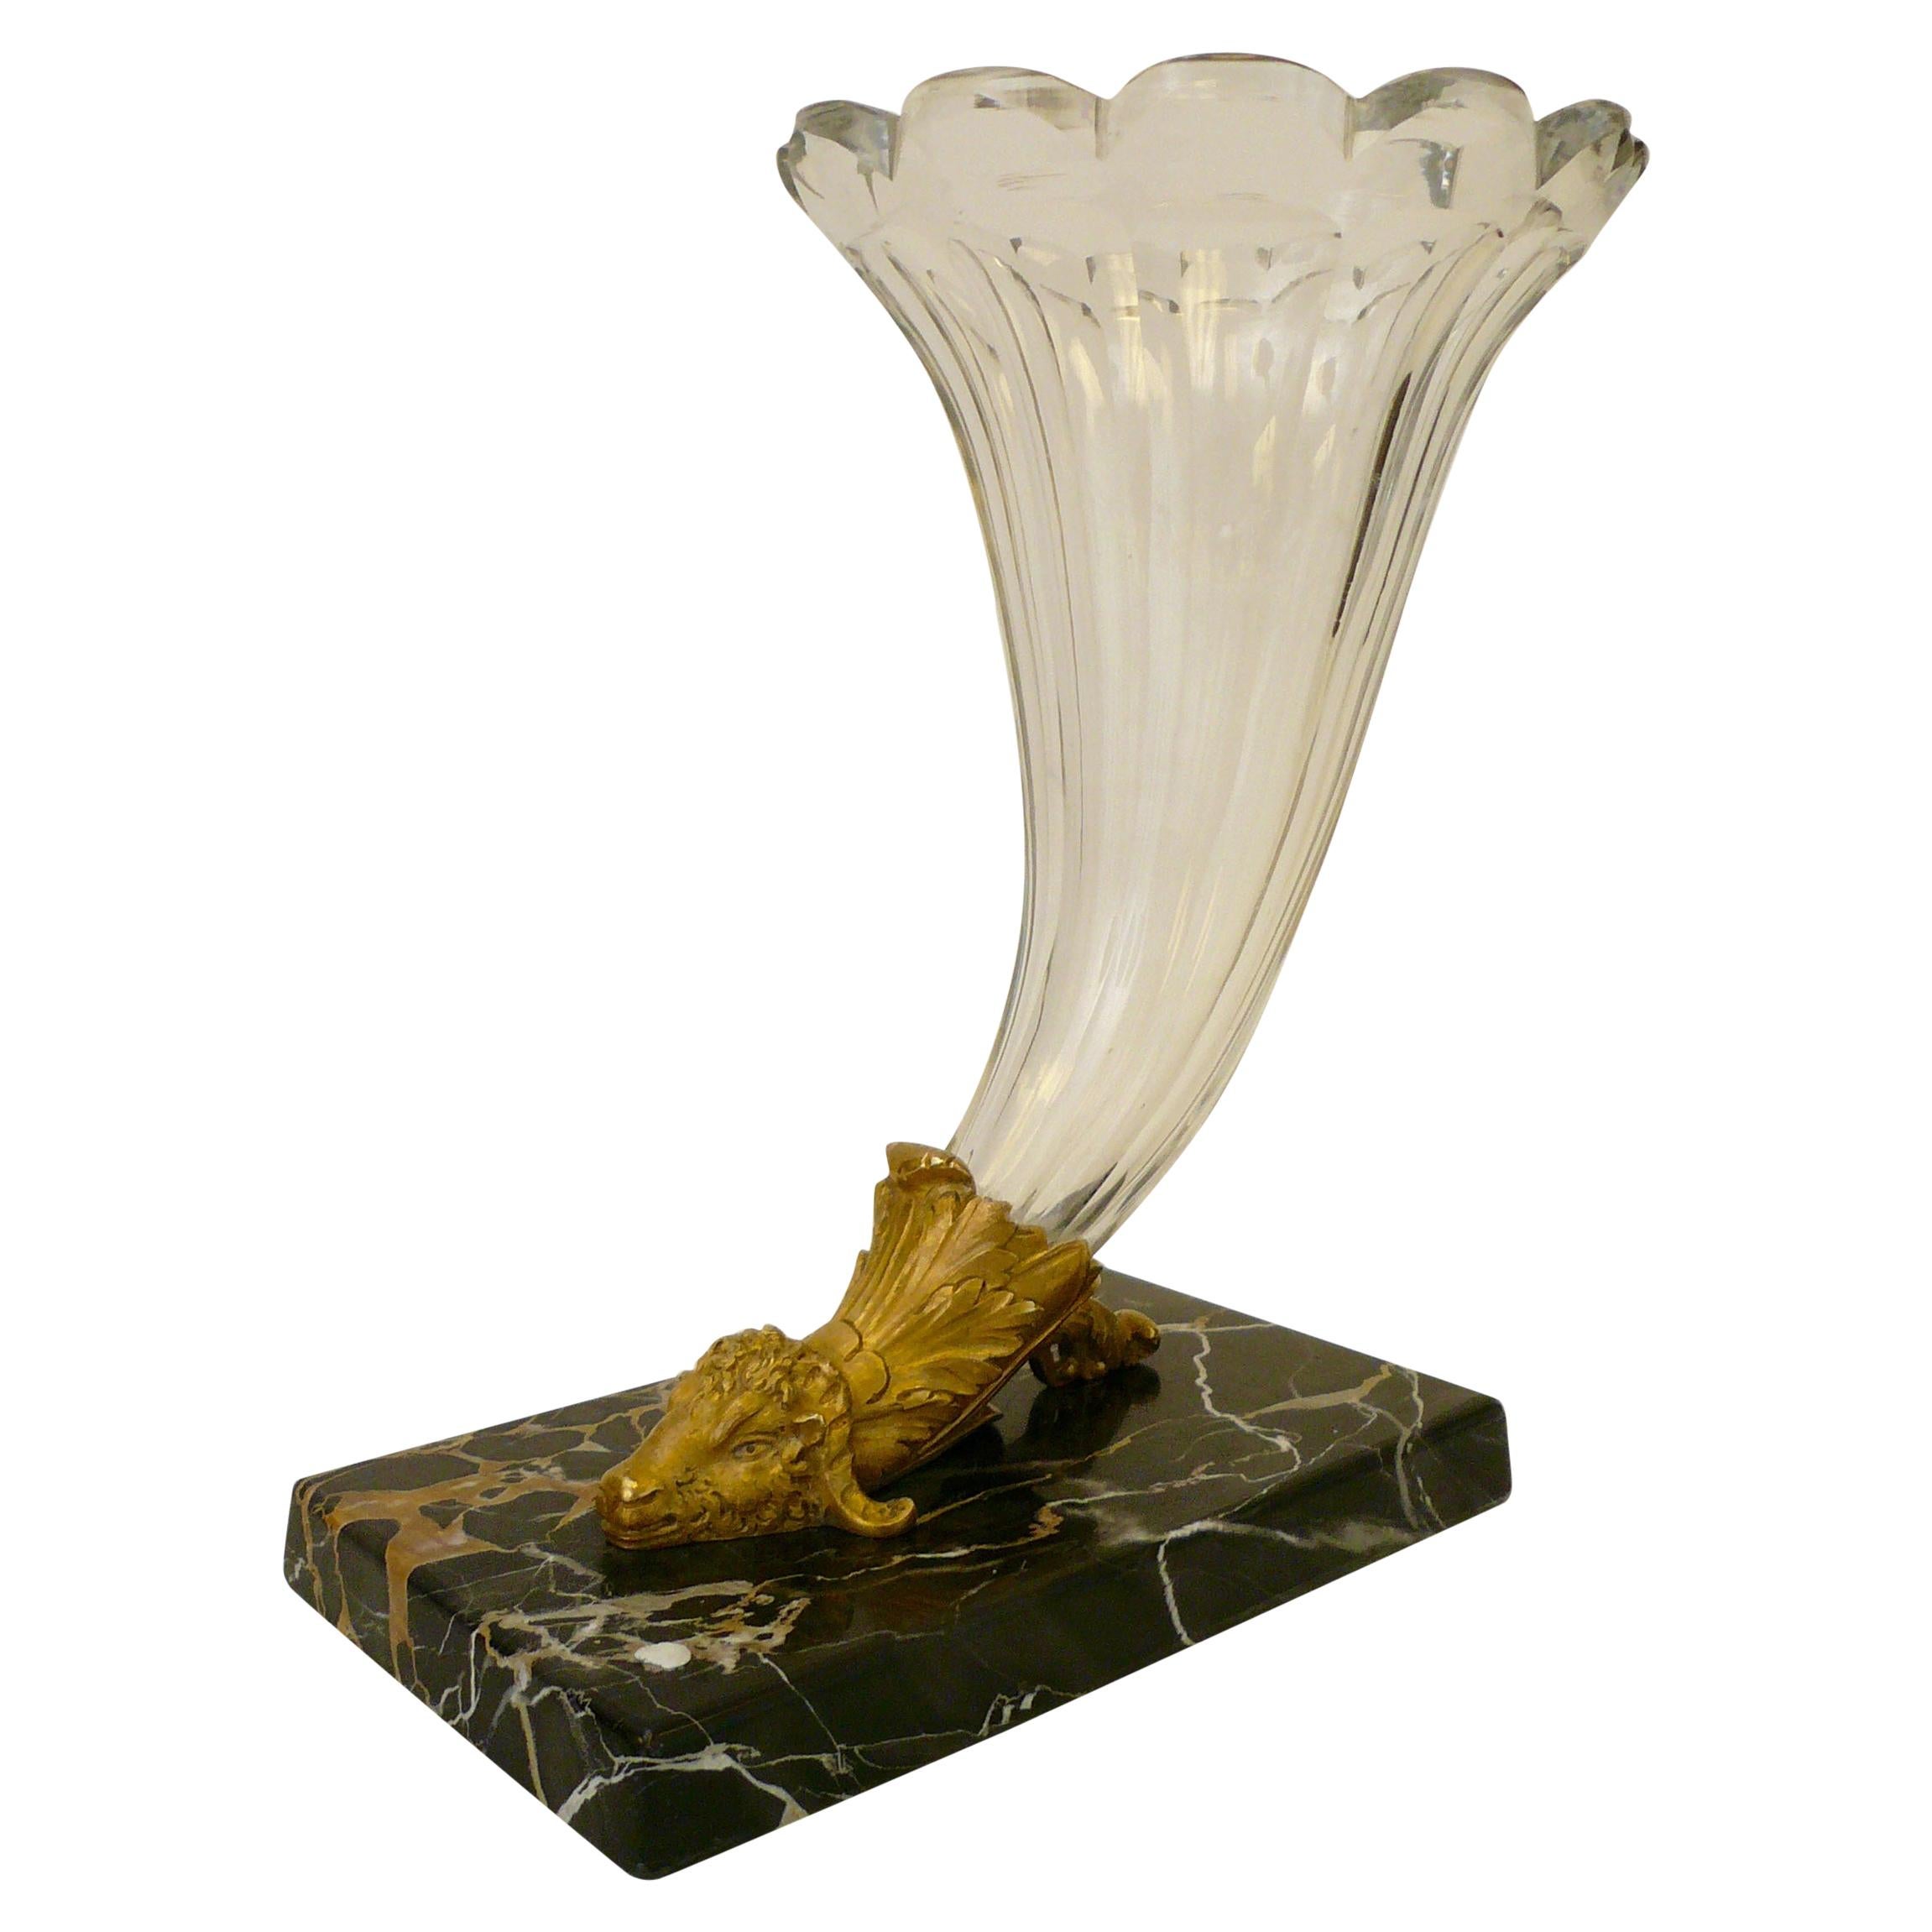 19th Century French Gilt Bronze, Baccarat Crystal and Marble Cornucopia Vase